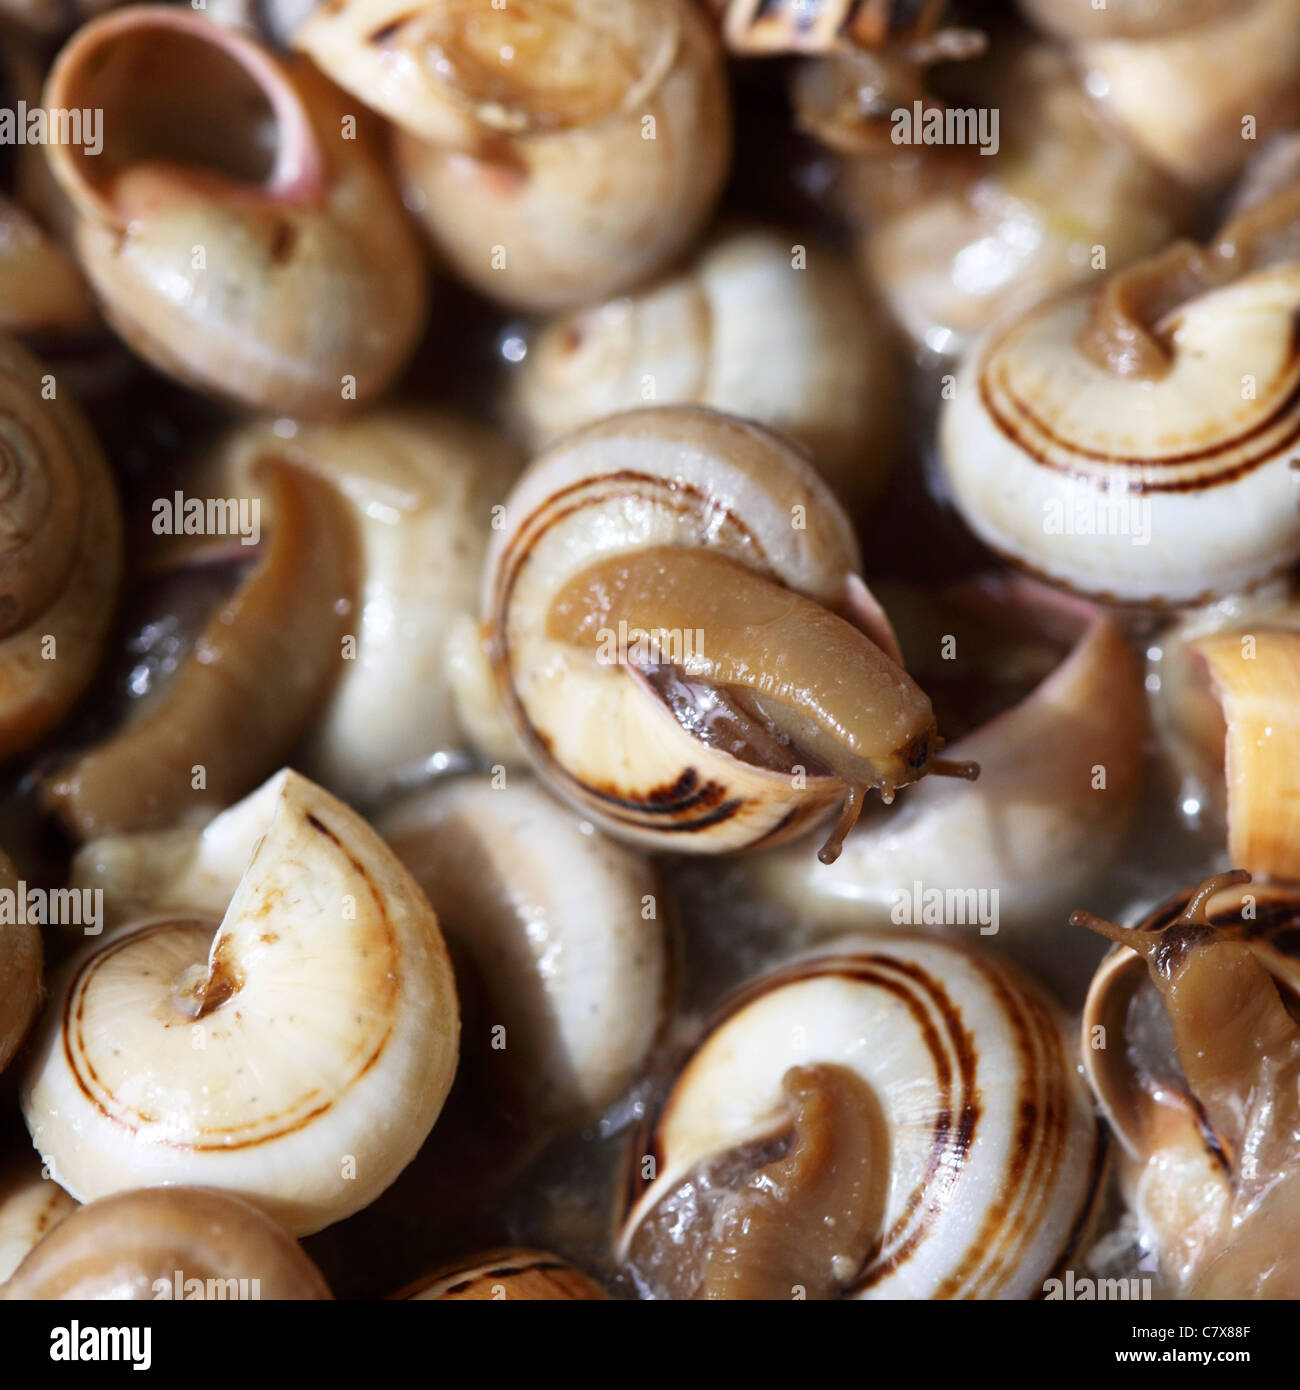 Snails (Caracois) are served for lunch at a Portuguese restaurant. Stock Photo